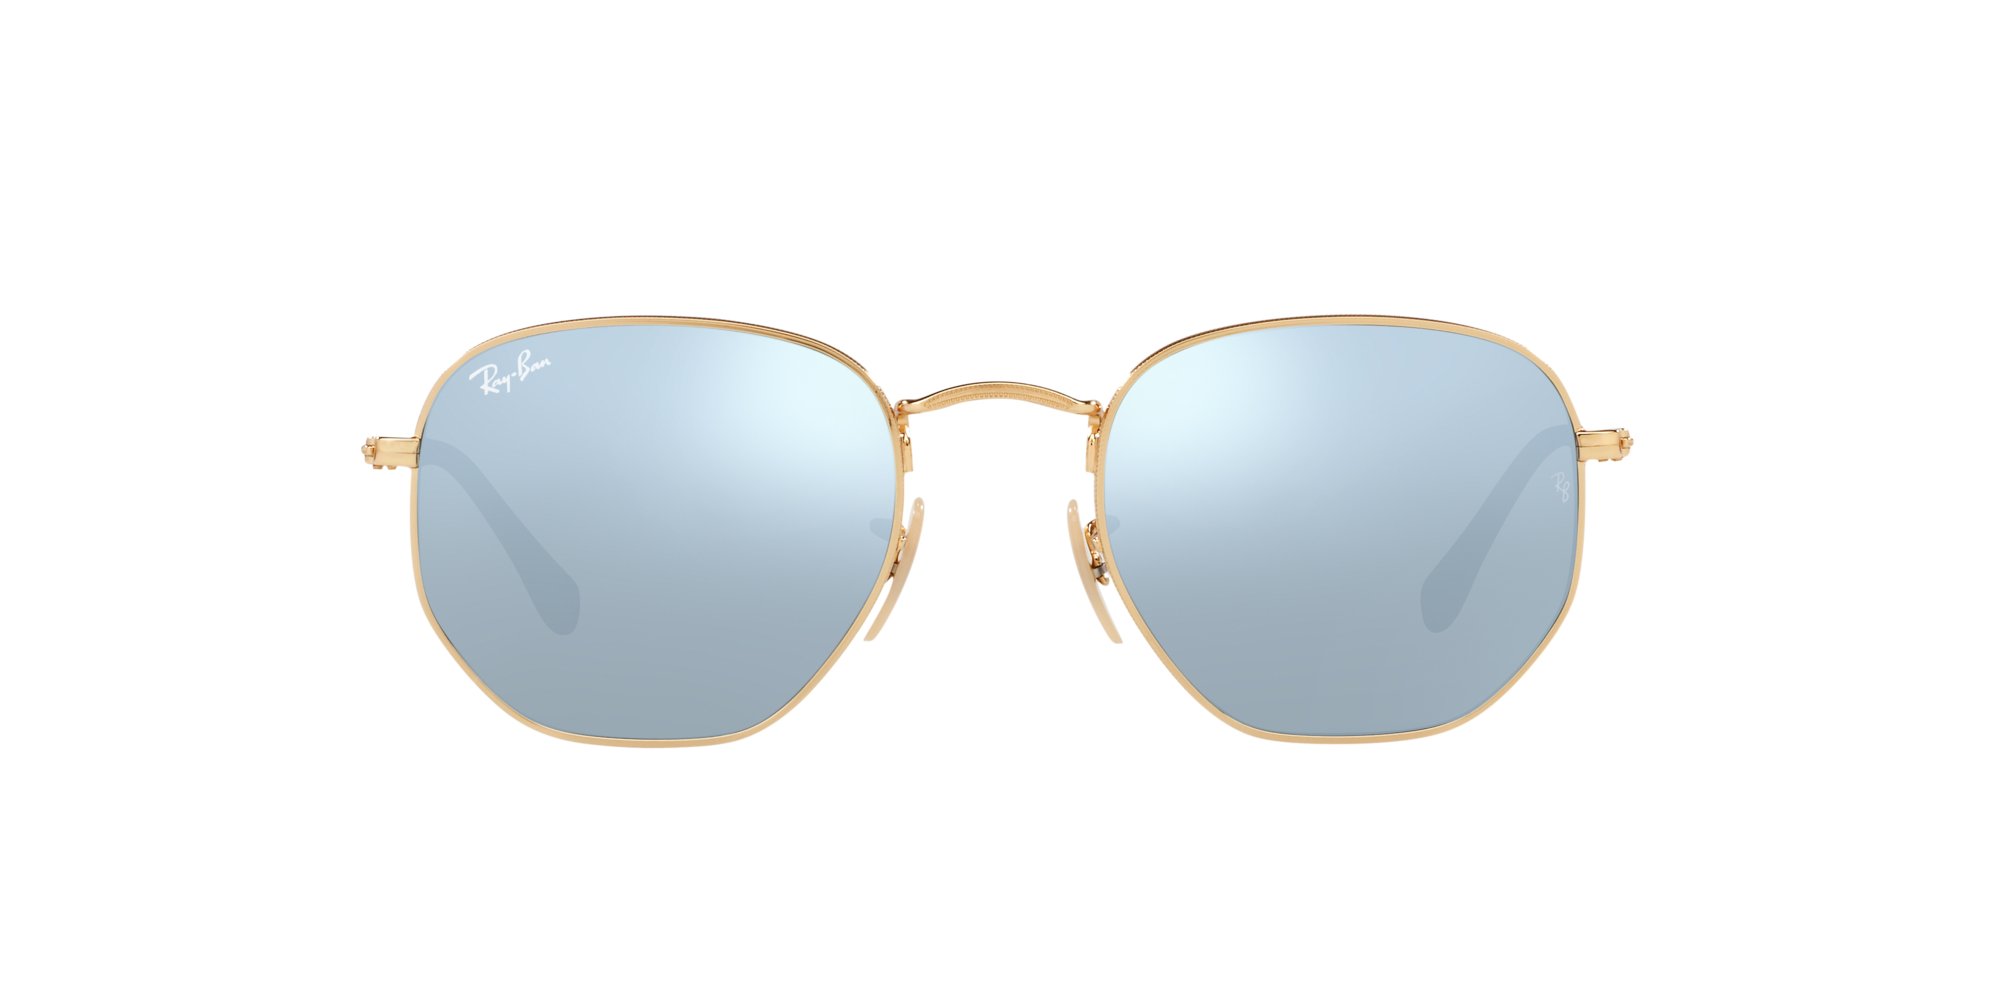 lenscrafters ray ban womens sunglasses